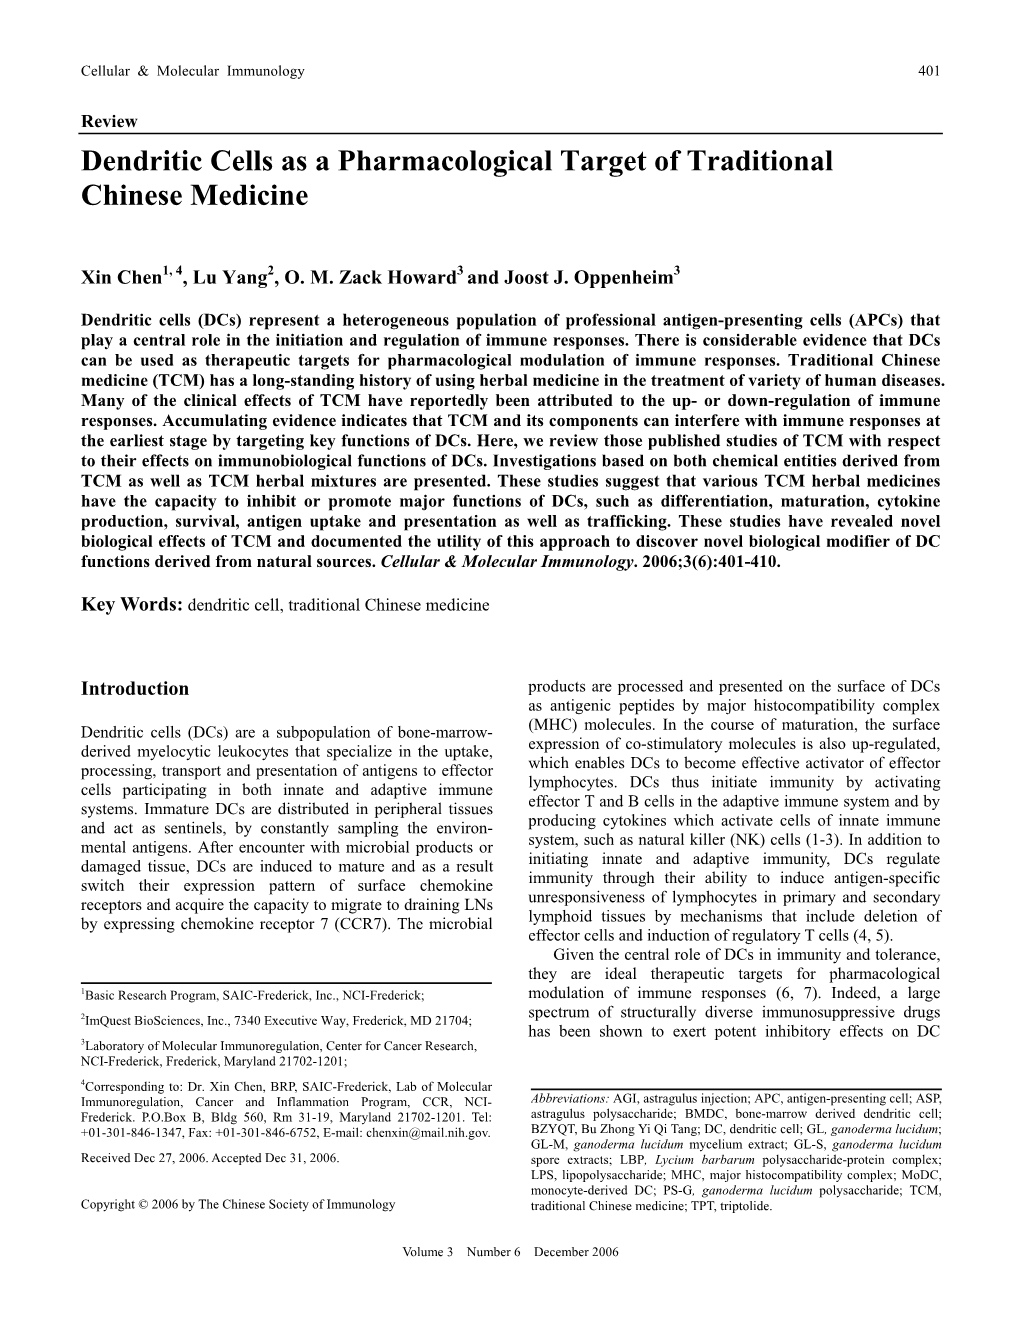 Dendritic Cells As a Pharmacological Target of Traditional Chinese Medicine